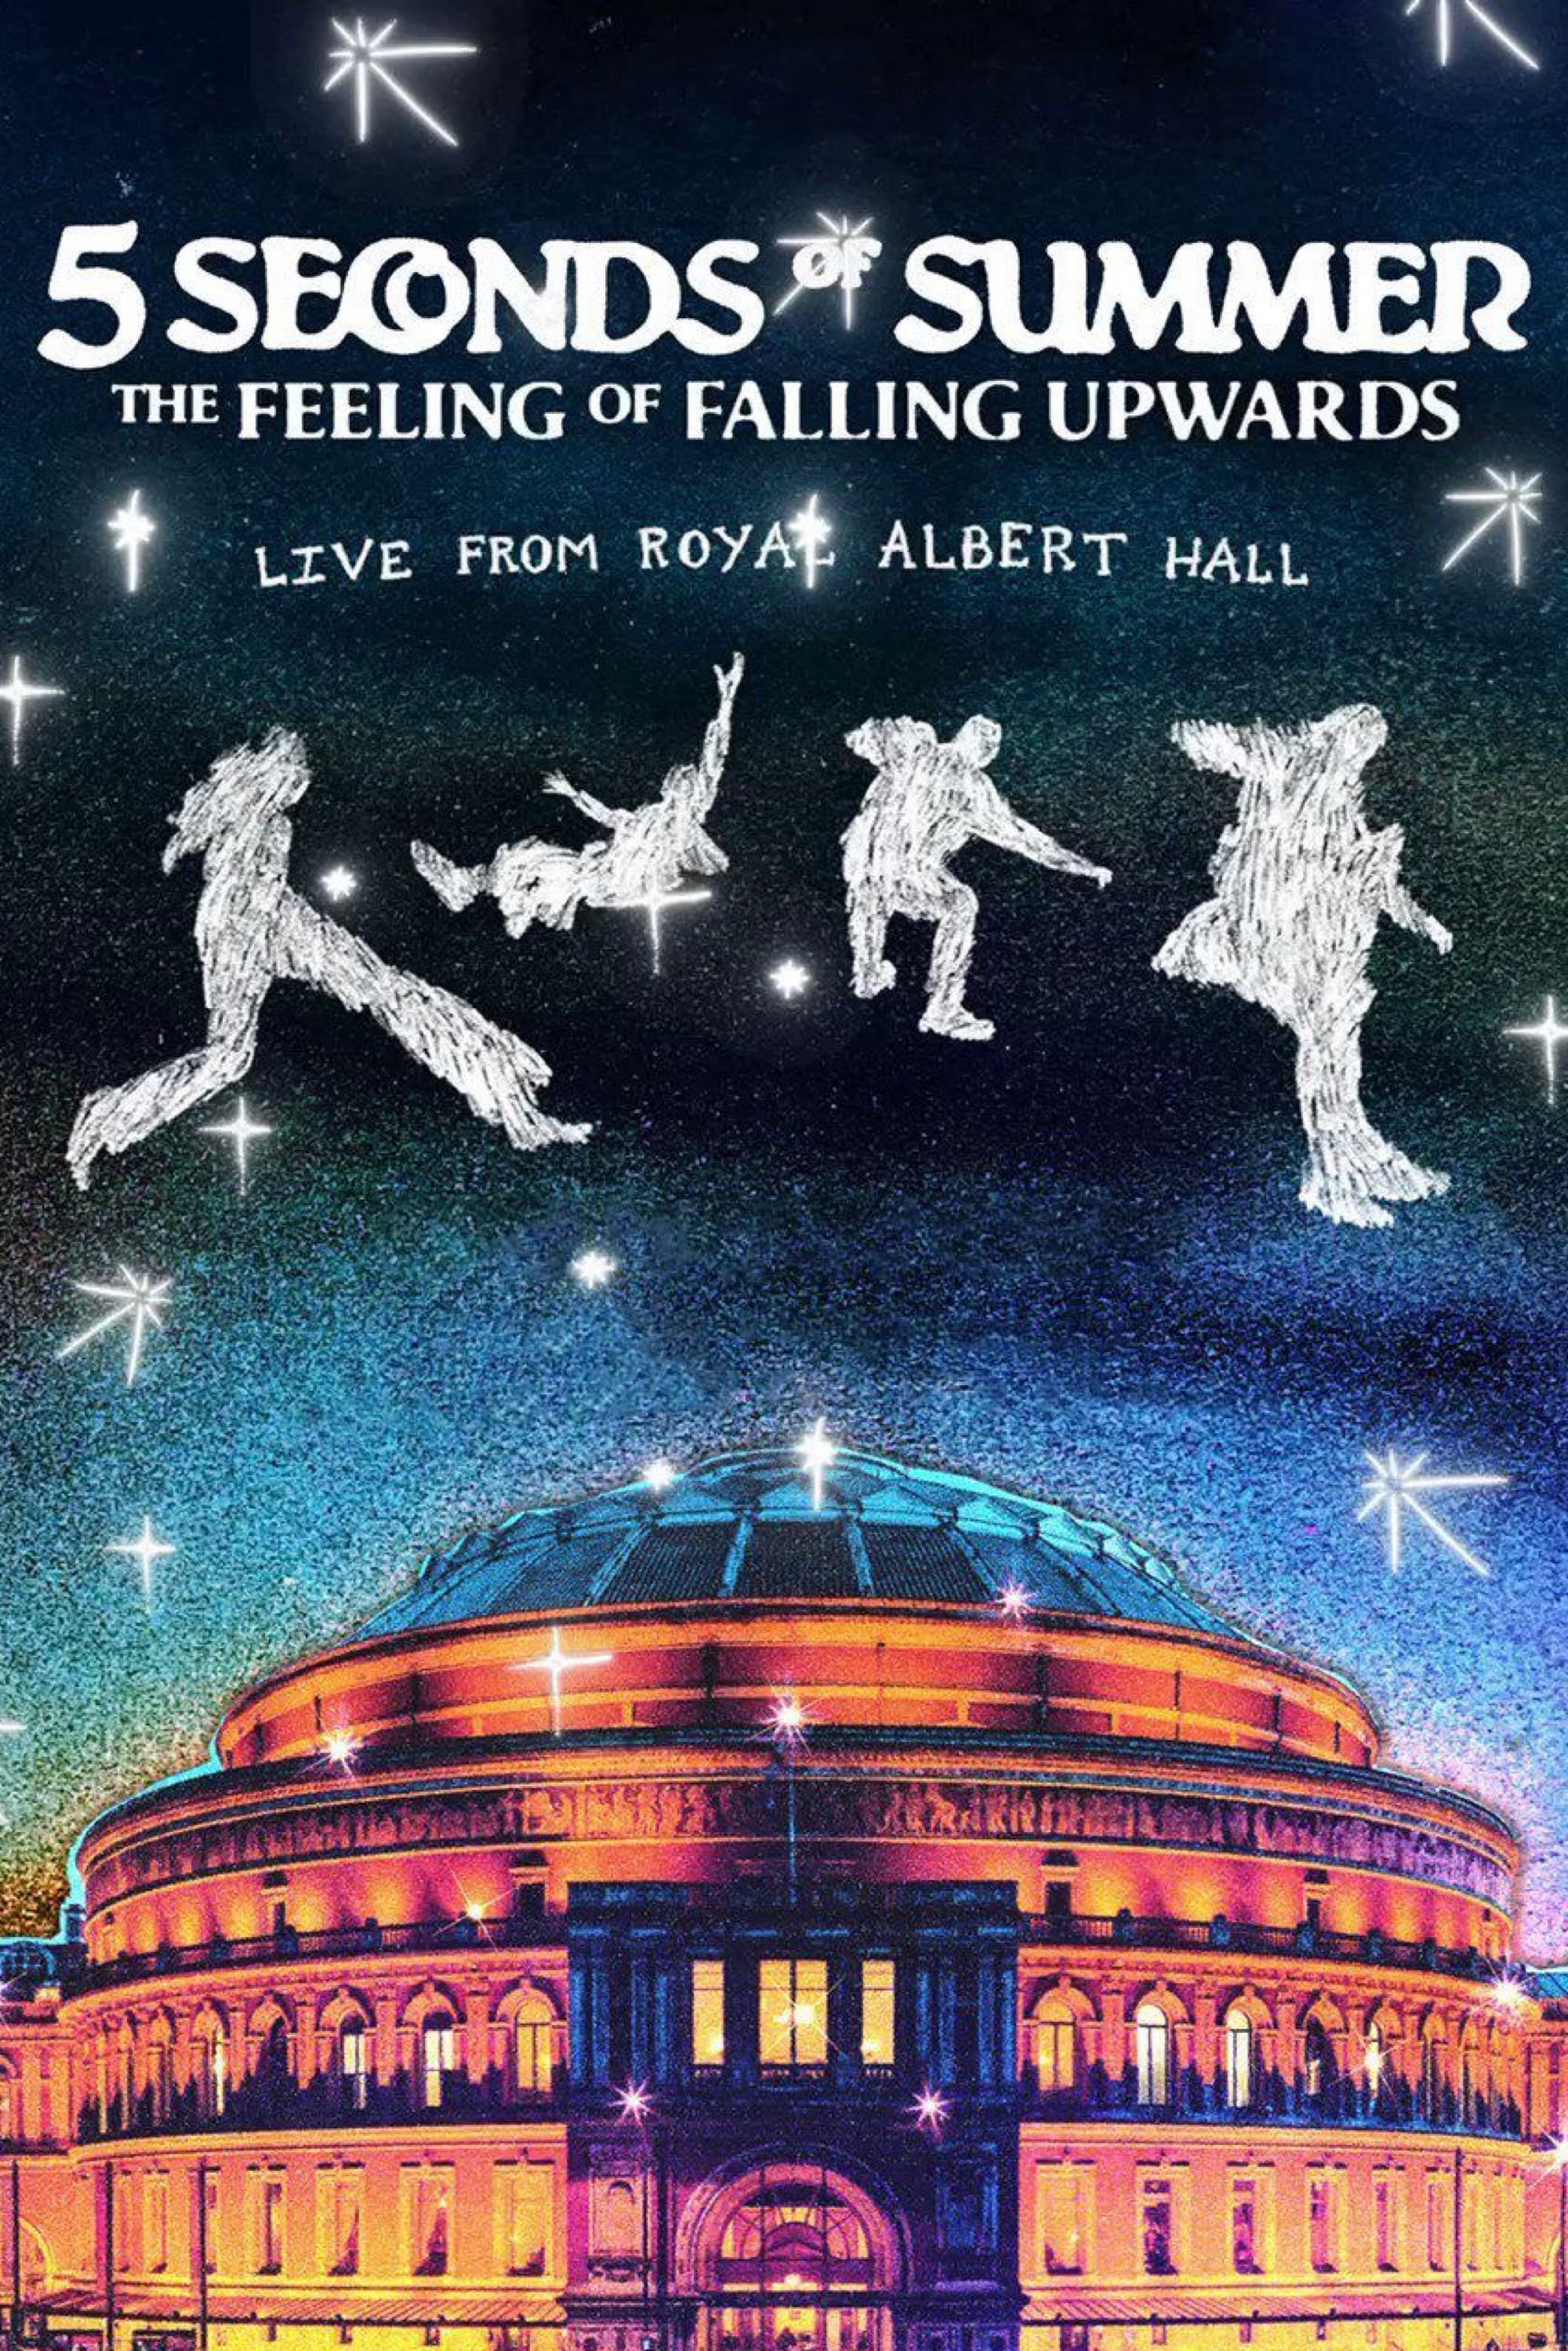 5 Seconds of Summer: The Feeling of Falling Upwards - Live from Royal Albert Hall